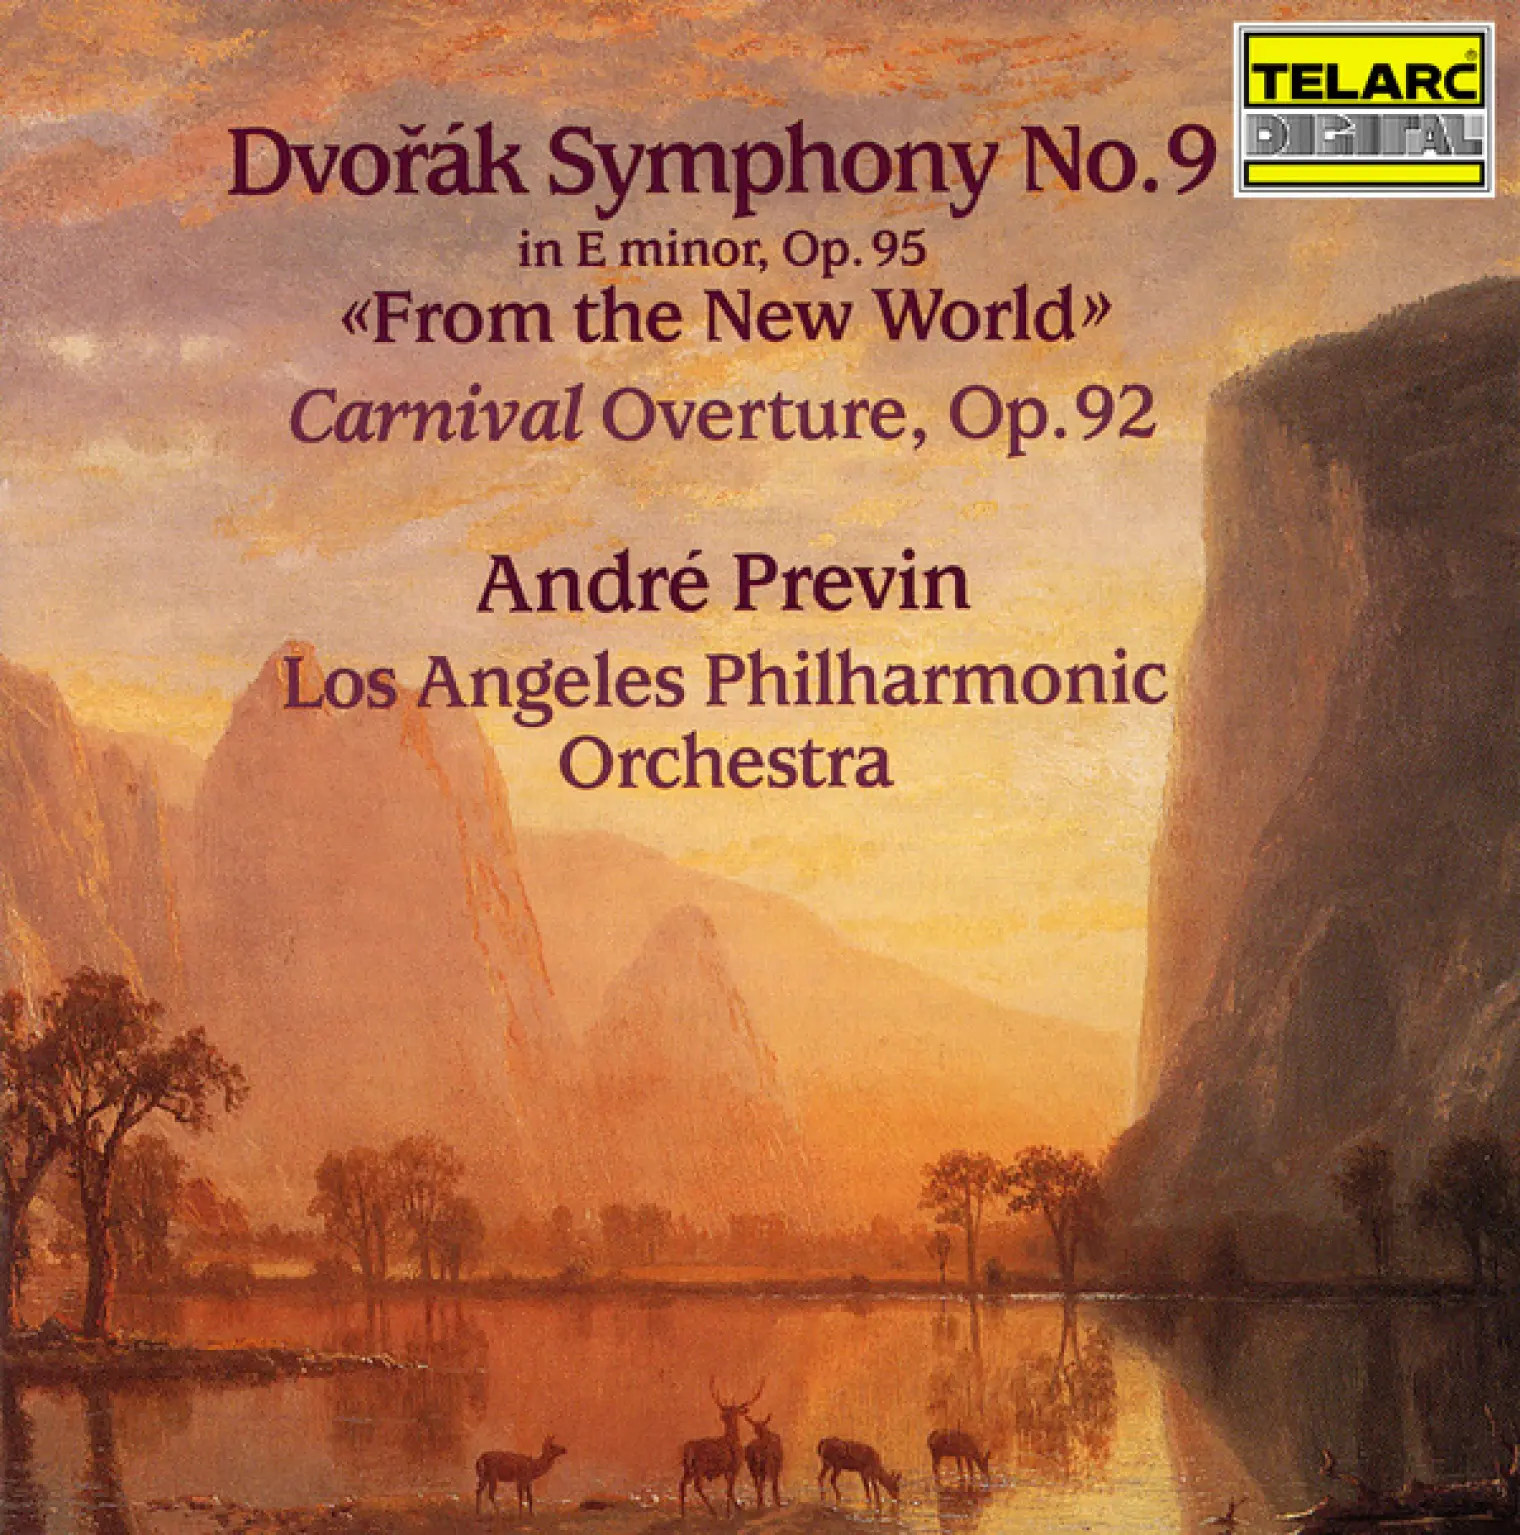 Dvořák: Symphony No. 9 in E Minor, Op. 95, B. 178 "From the New World" & Carnival Overture, Op. 92, B. 169 -  André Previn 